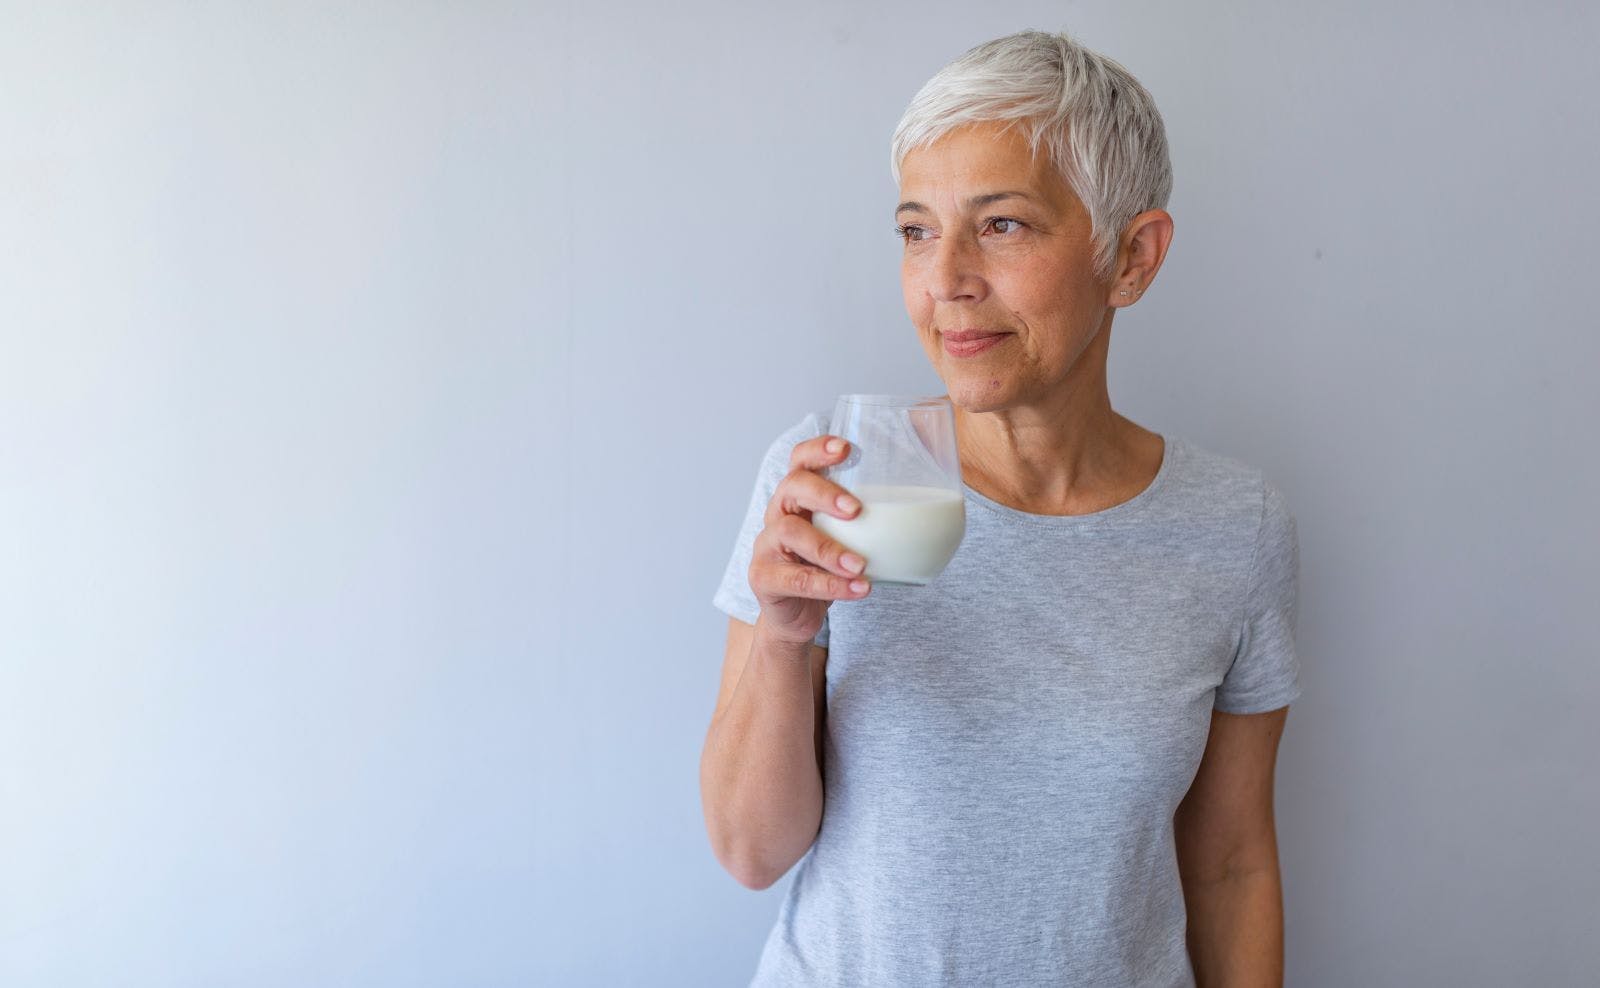 A woman holds a glass of milk.